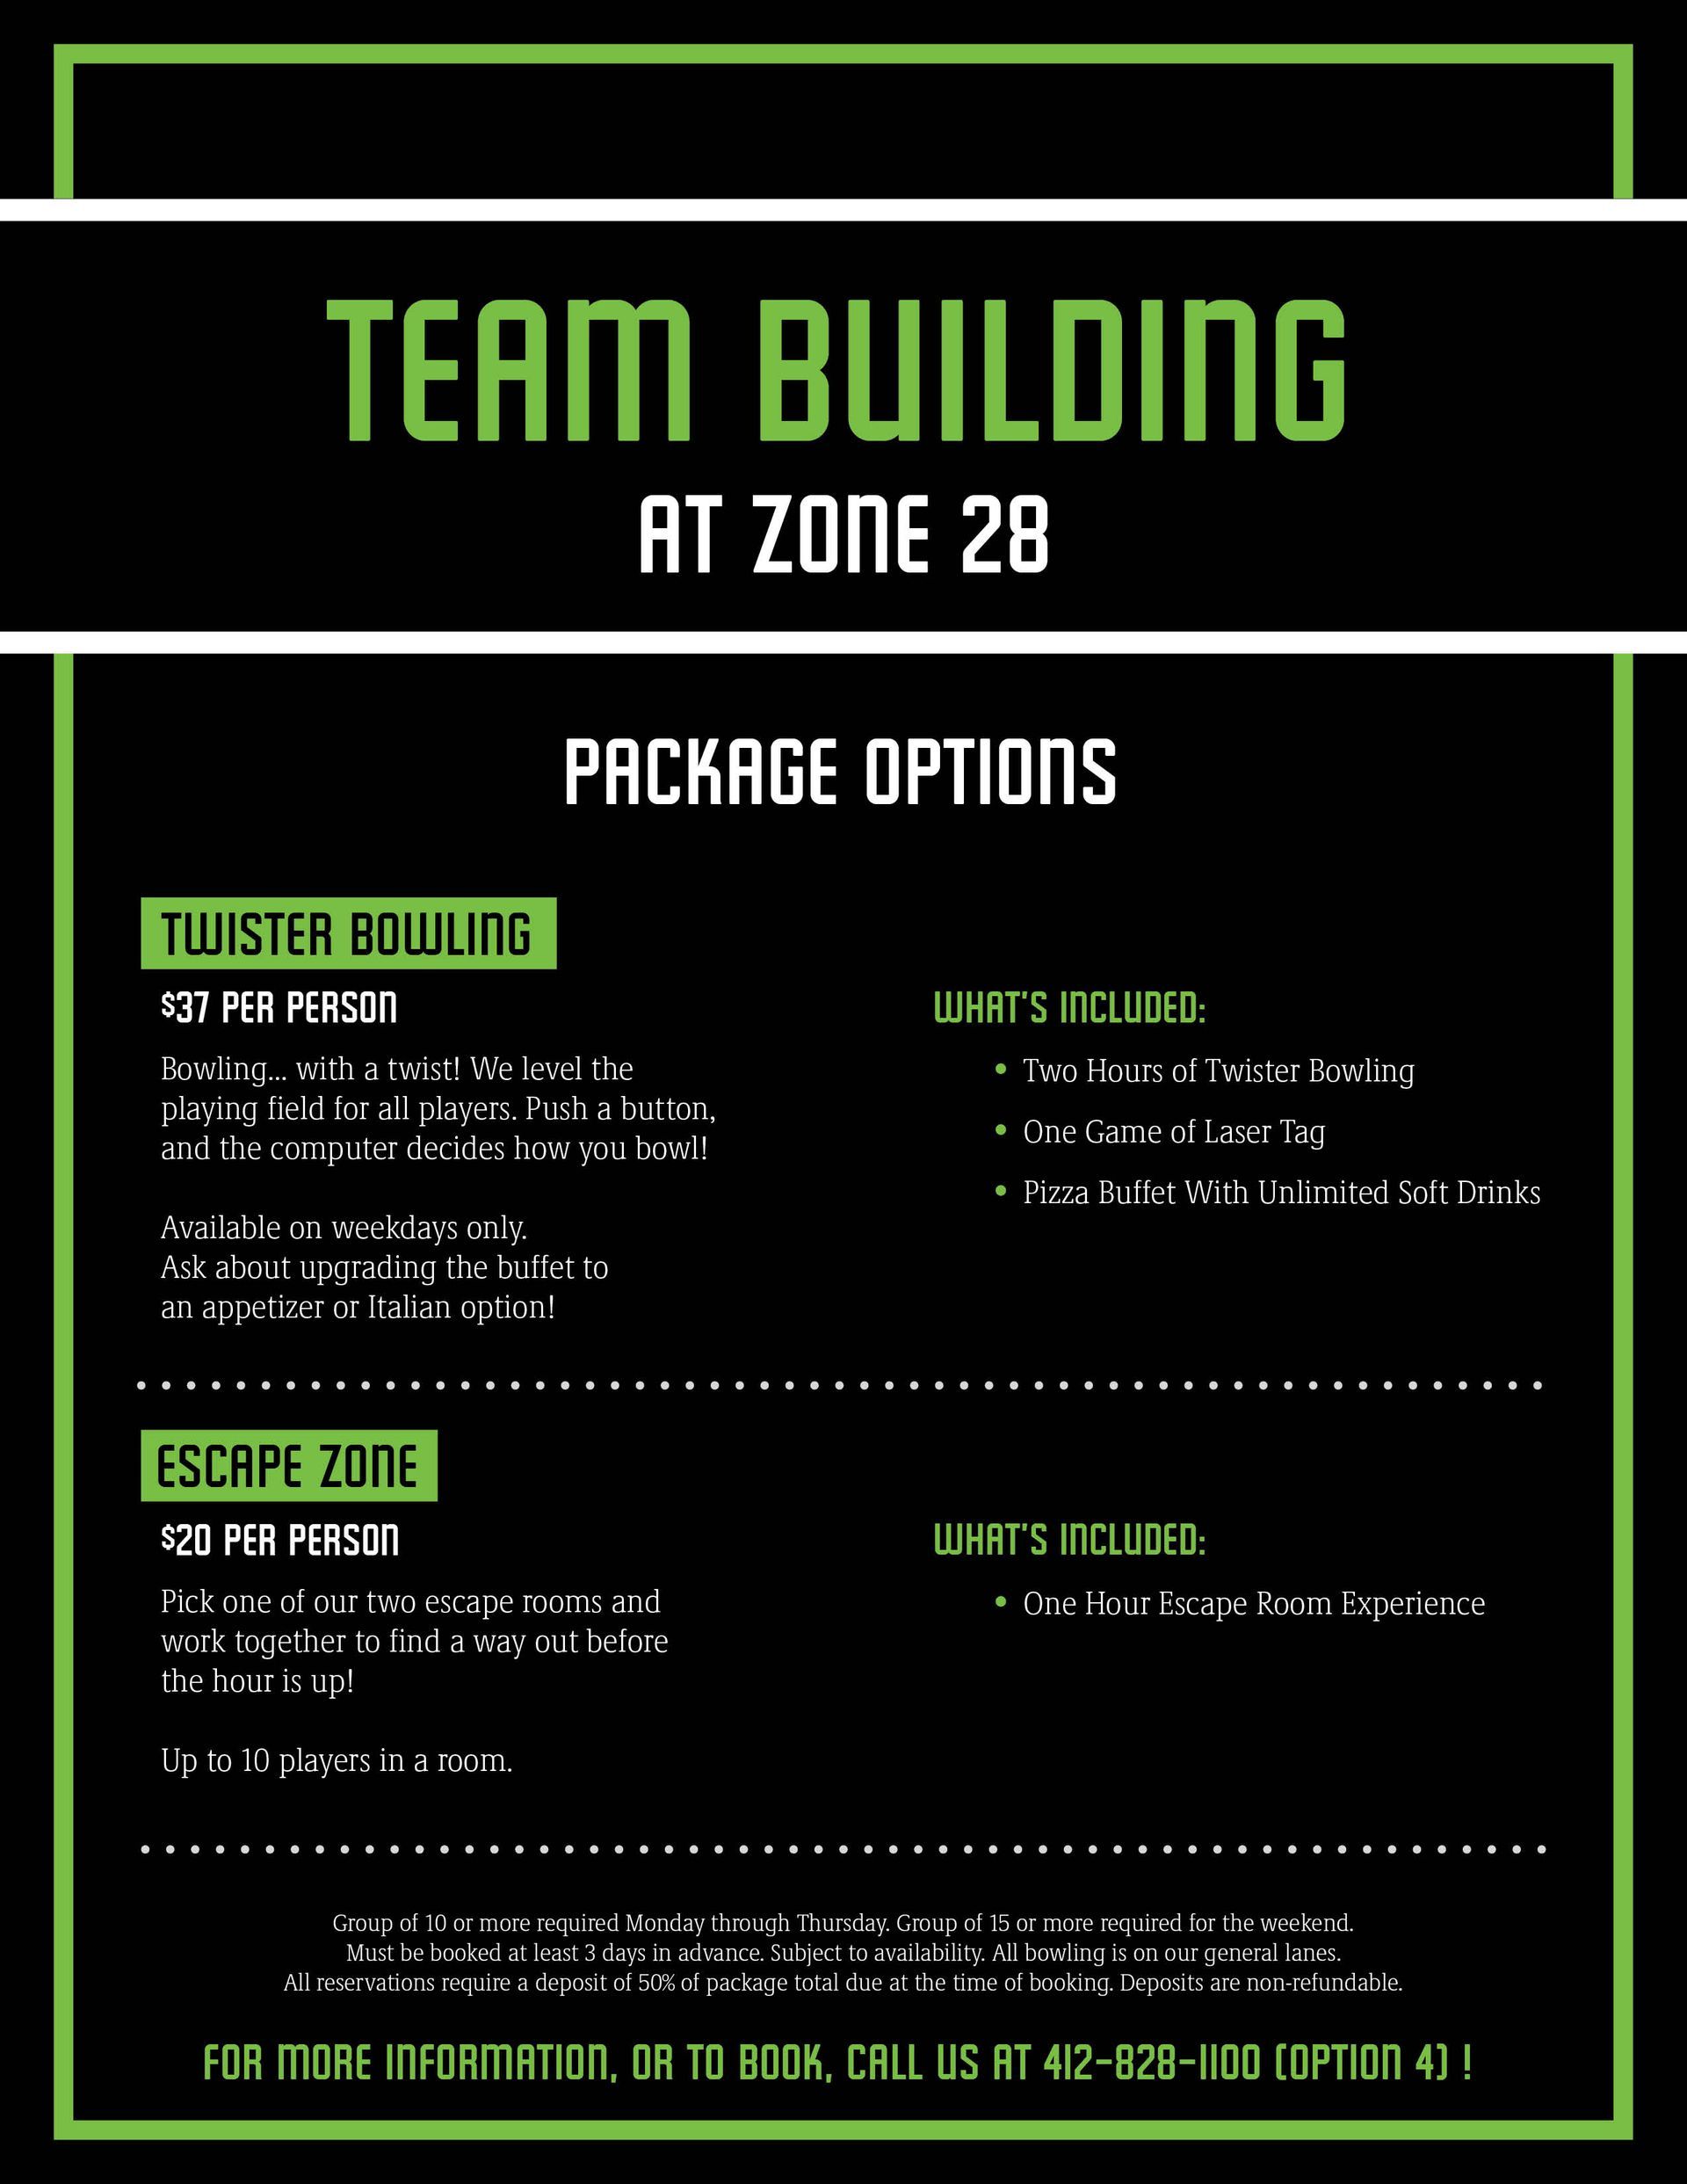 Team Building at Zone 28